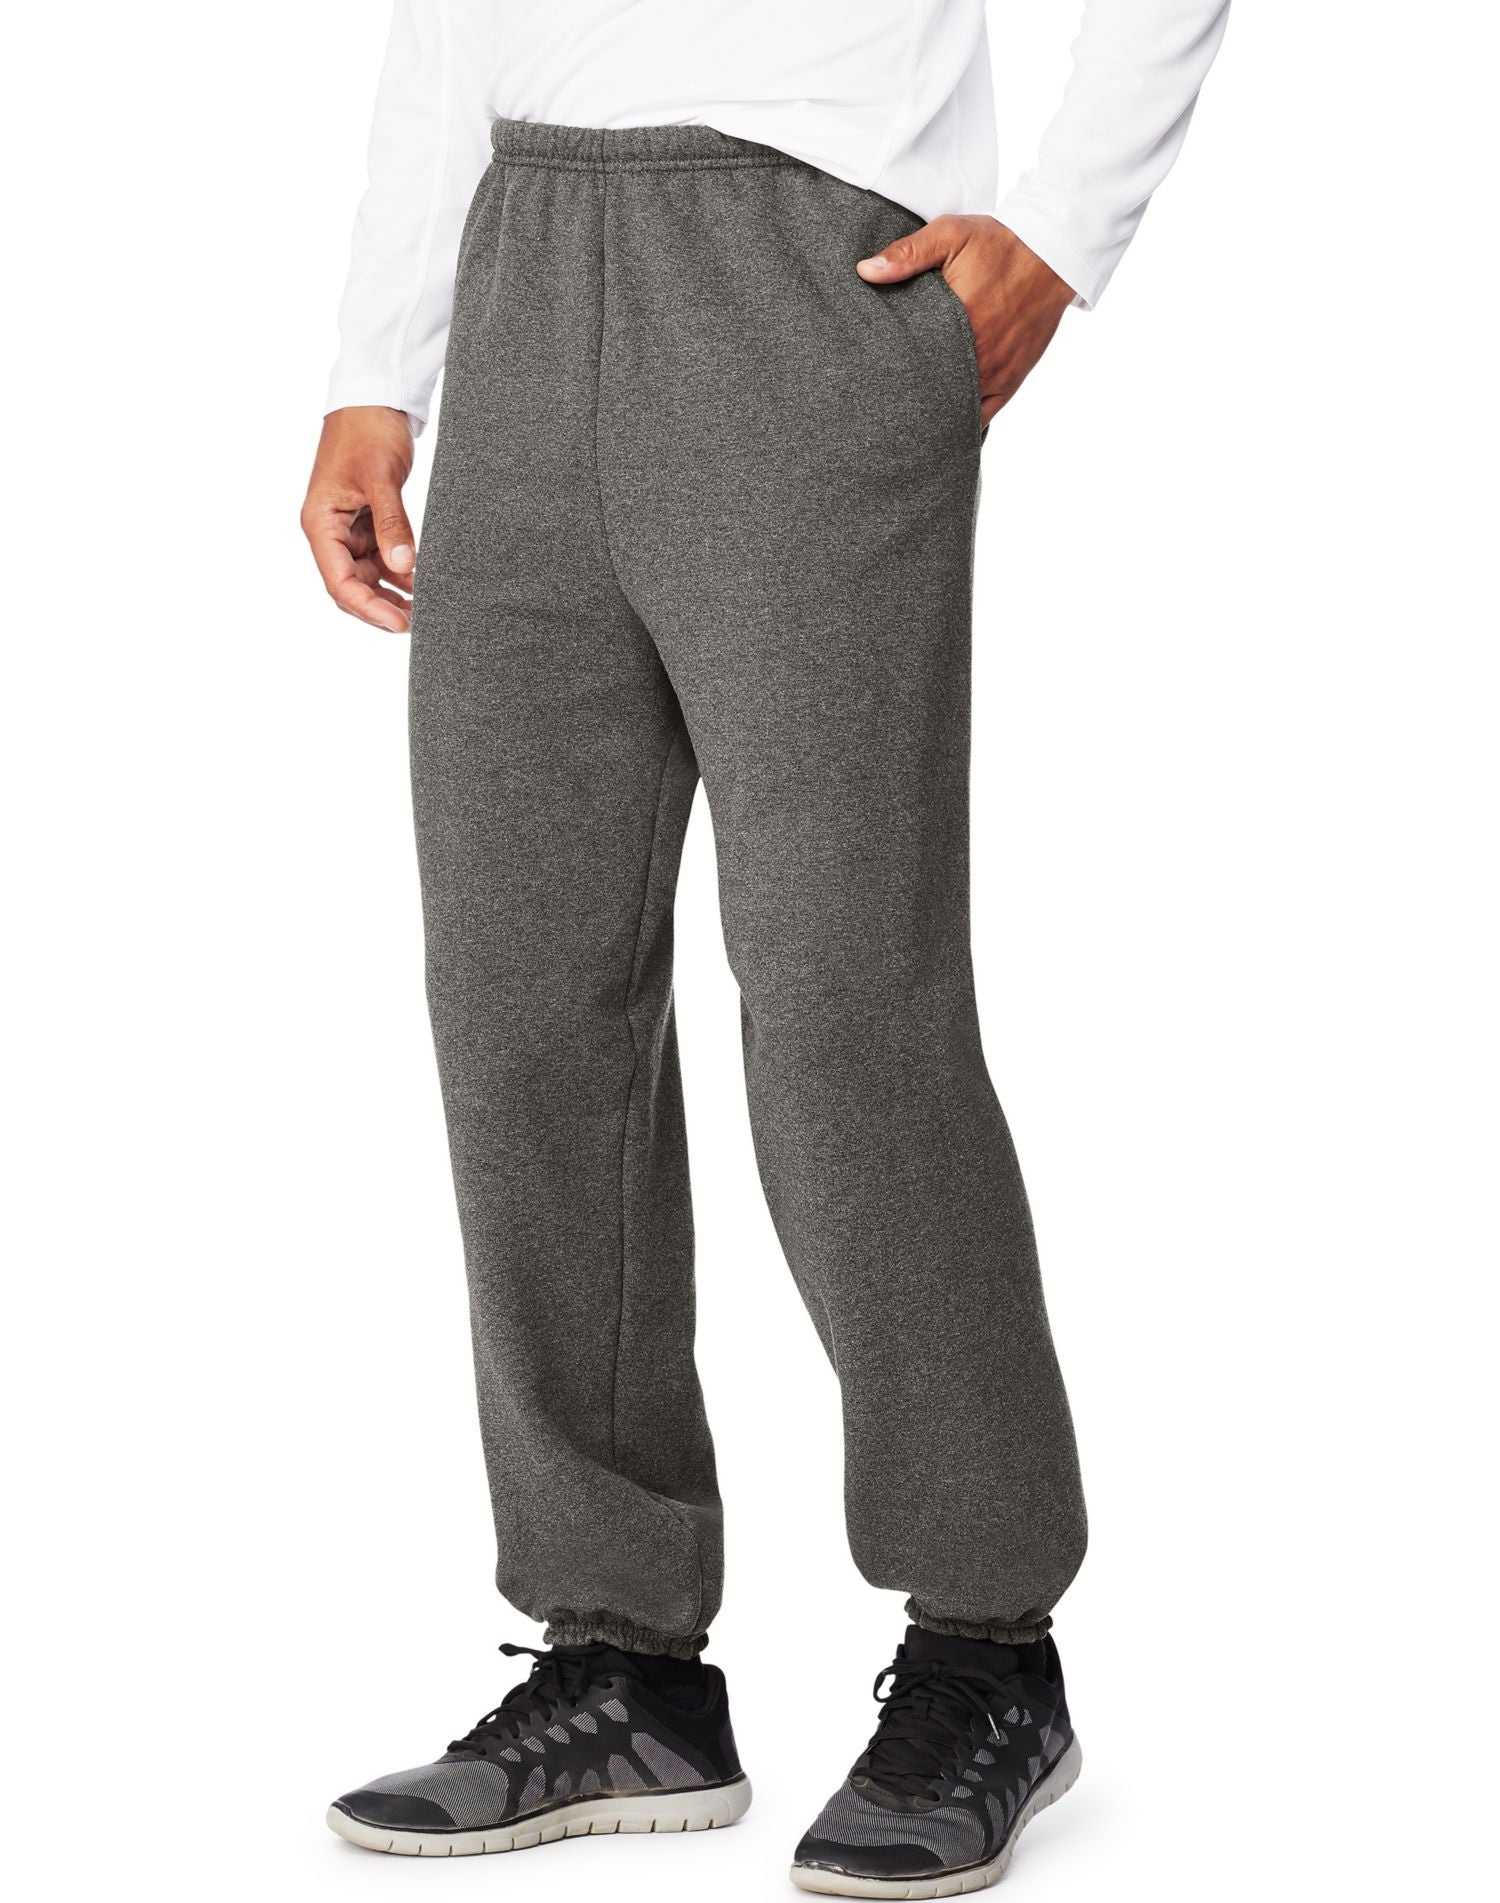 OF360 - Hanes Mens Sport Ultimate Cotton Fleece Sweatpants With Pockets